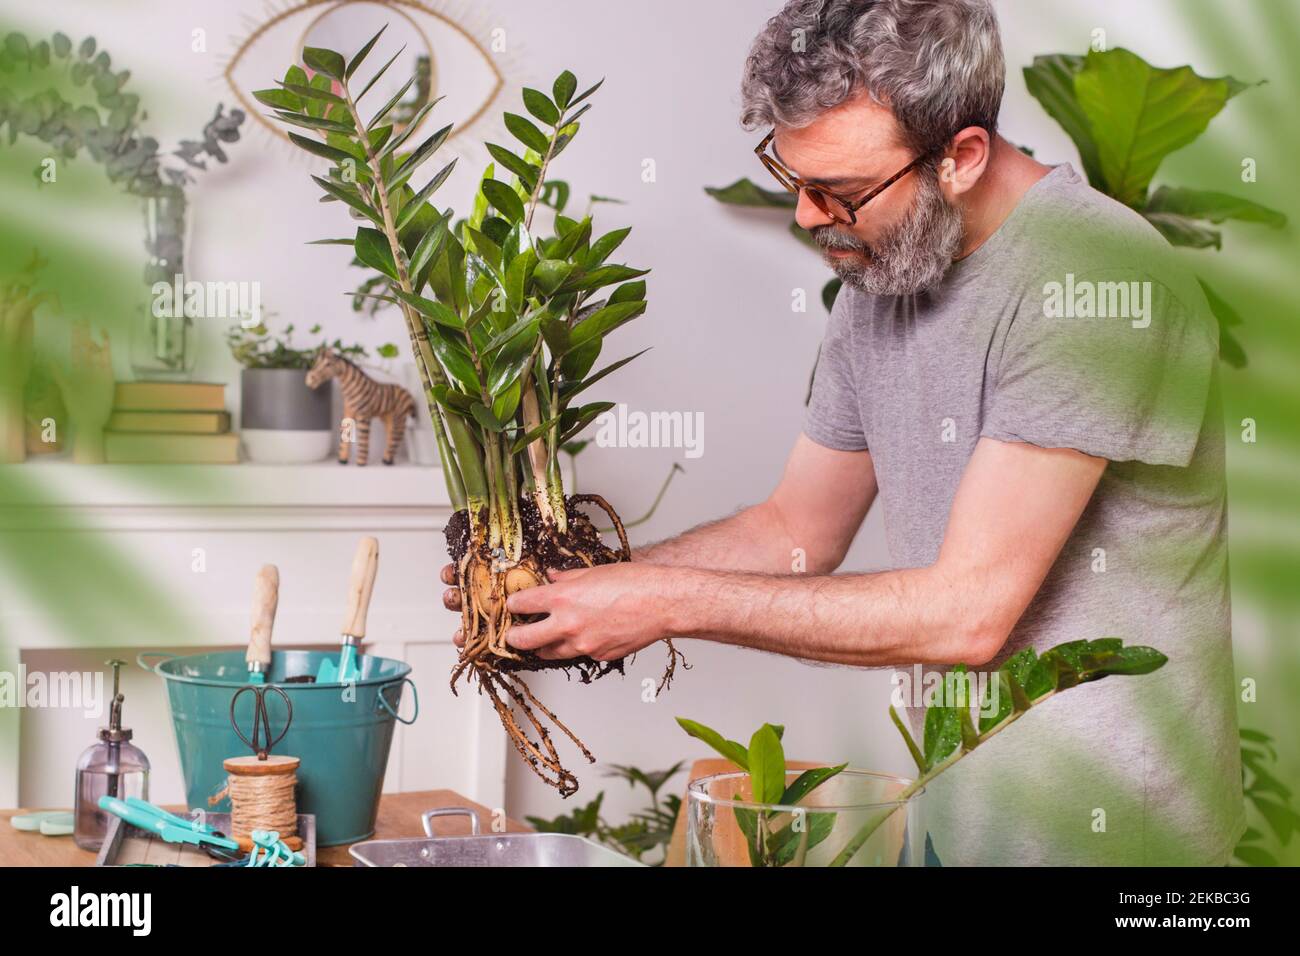 Man removing mud from Zamioculcas Zamiifolia plant while gardening at home Stock Photo